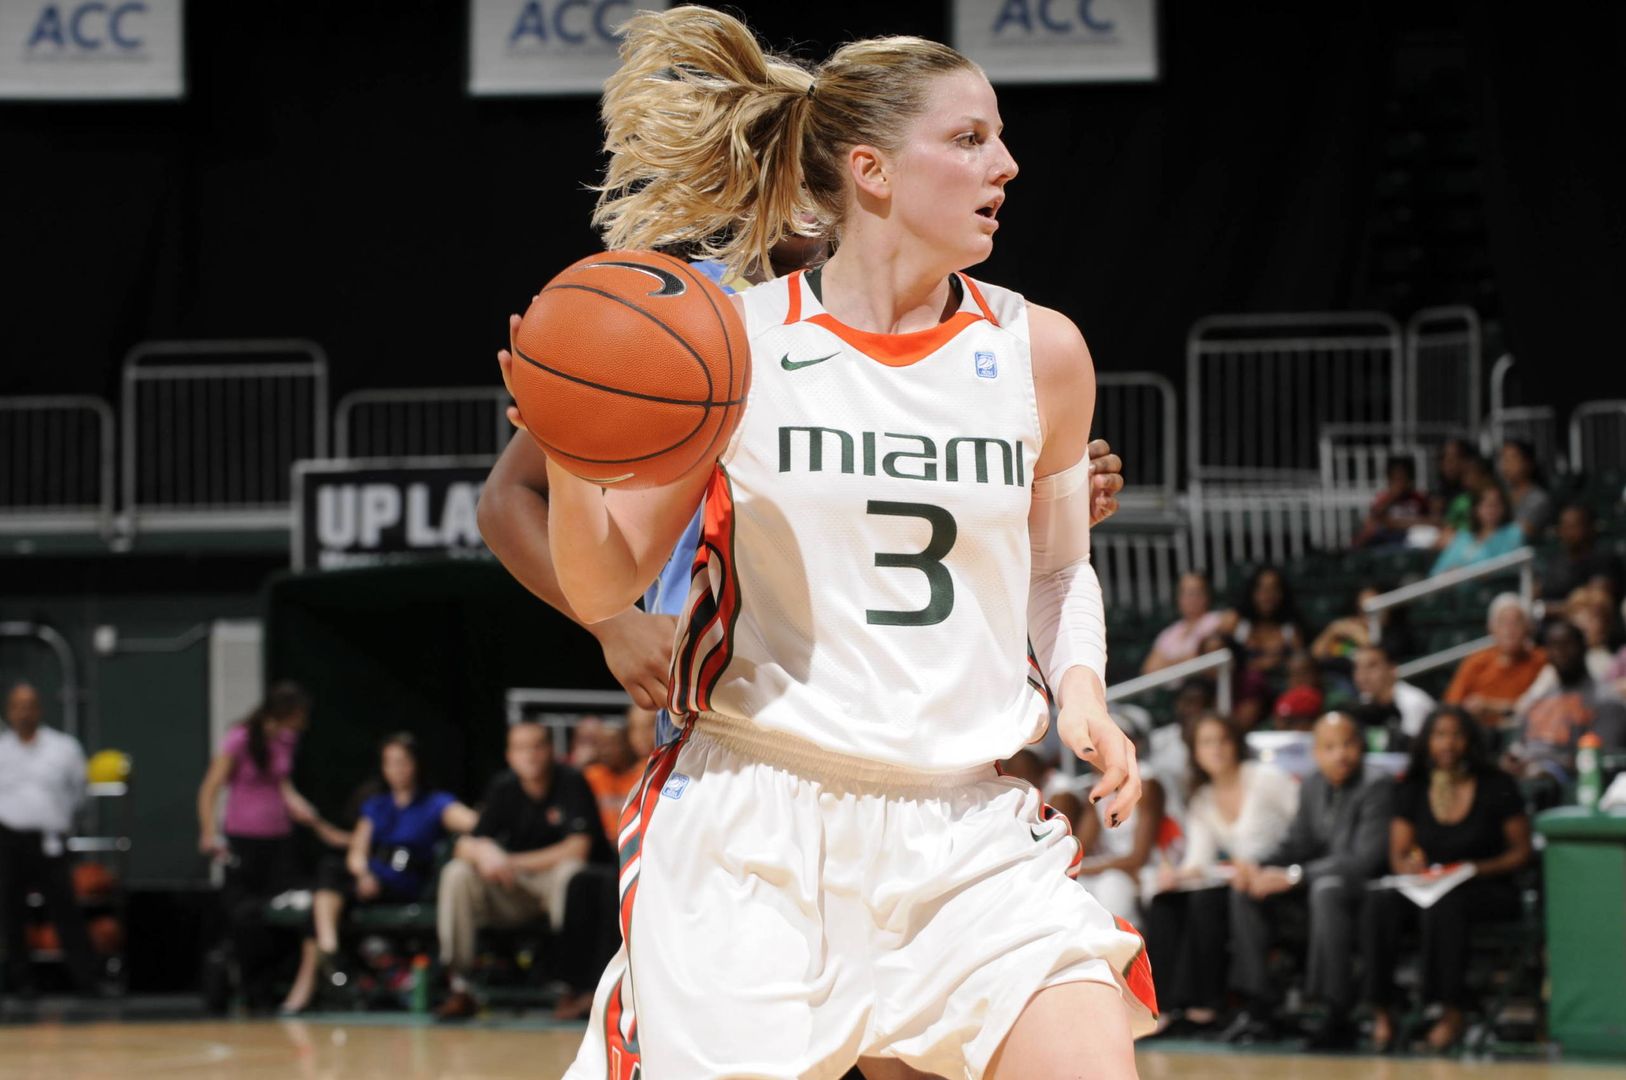 Yderstrom Earns ACC Honors, WBB Picked Fifth